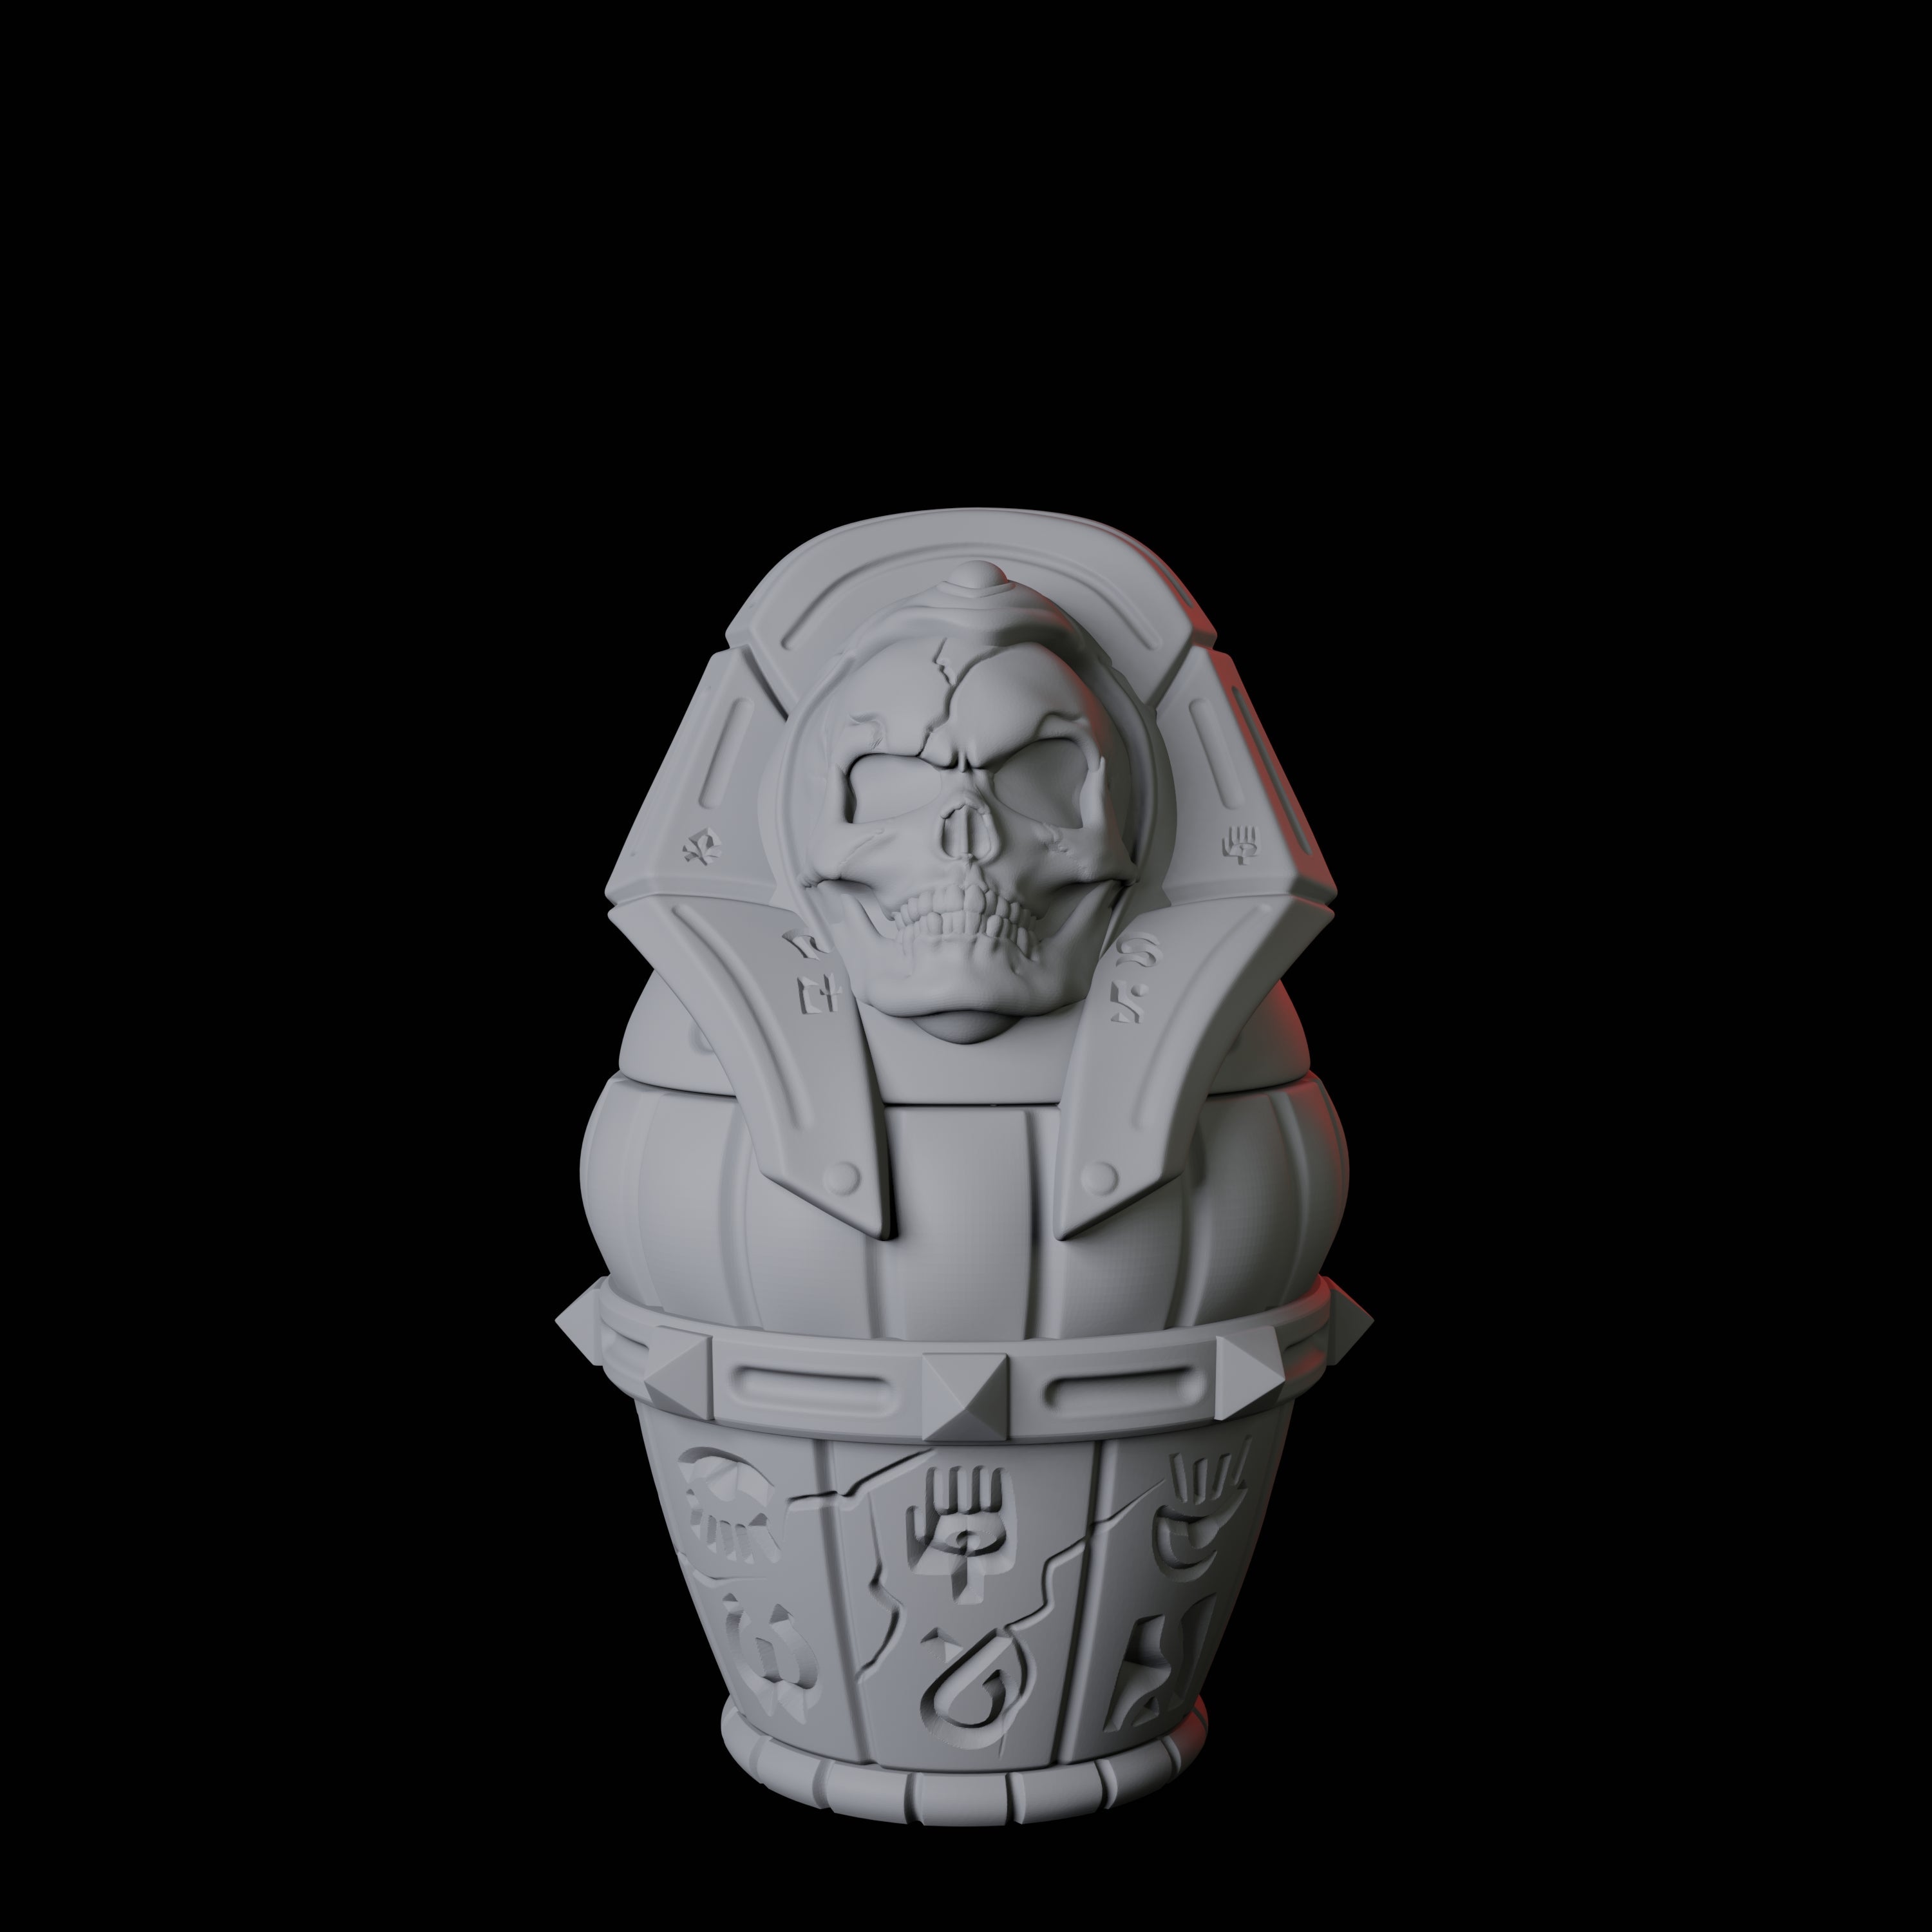 Ancient Egyptian Barrel Miniature for Dungeons and Dragons, Pathfinder or other TTRPGs